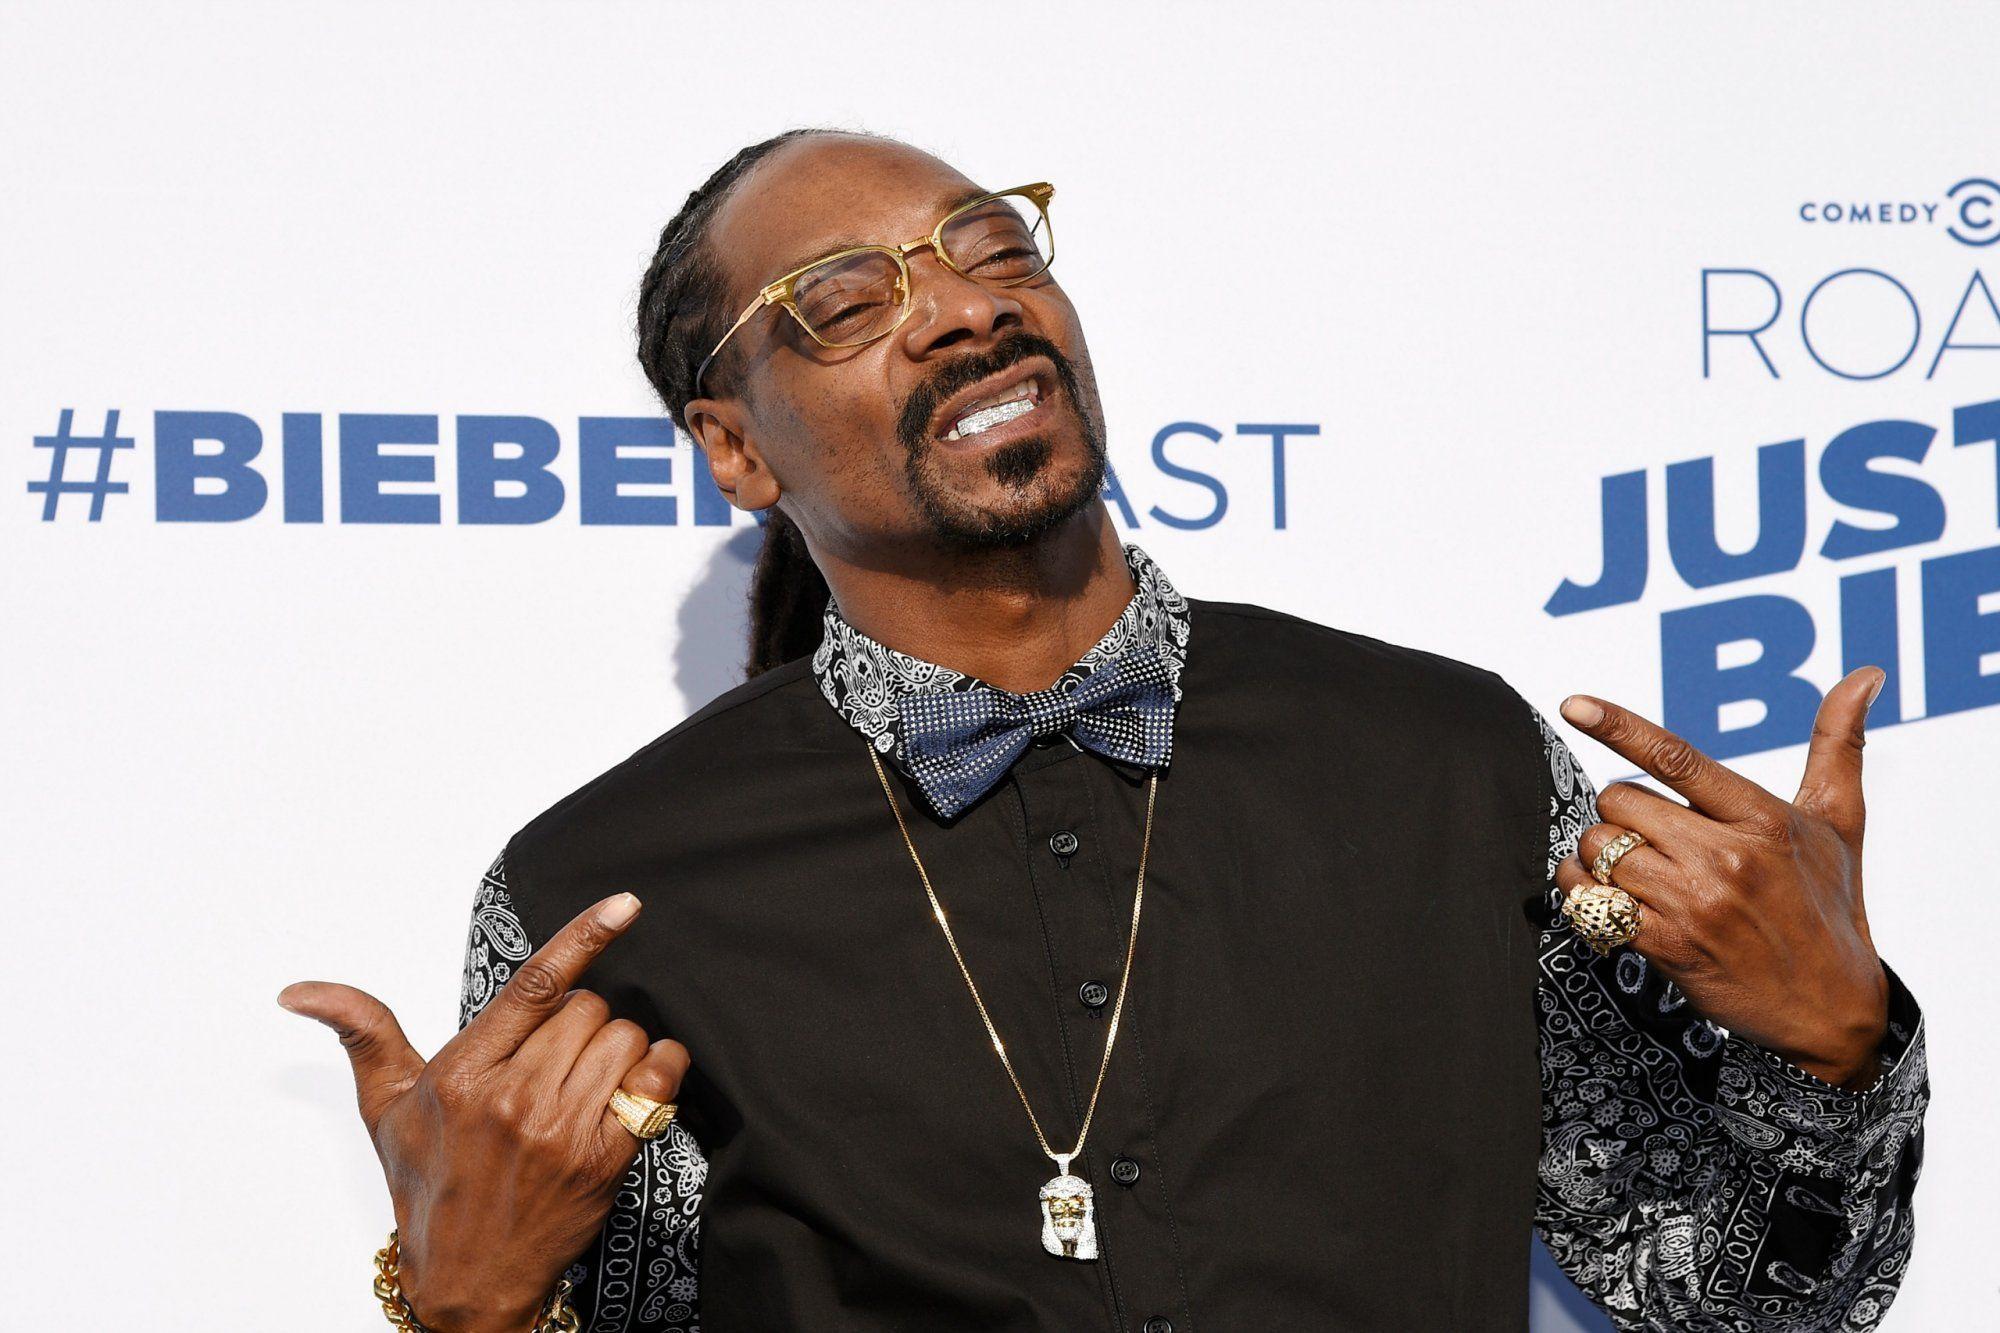 Snoop Dogg Wallpaper Image Photo Picture Background